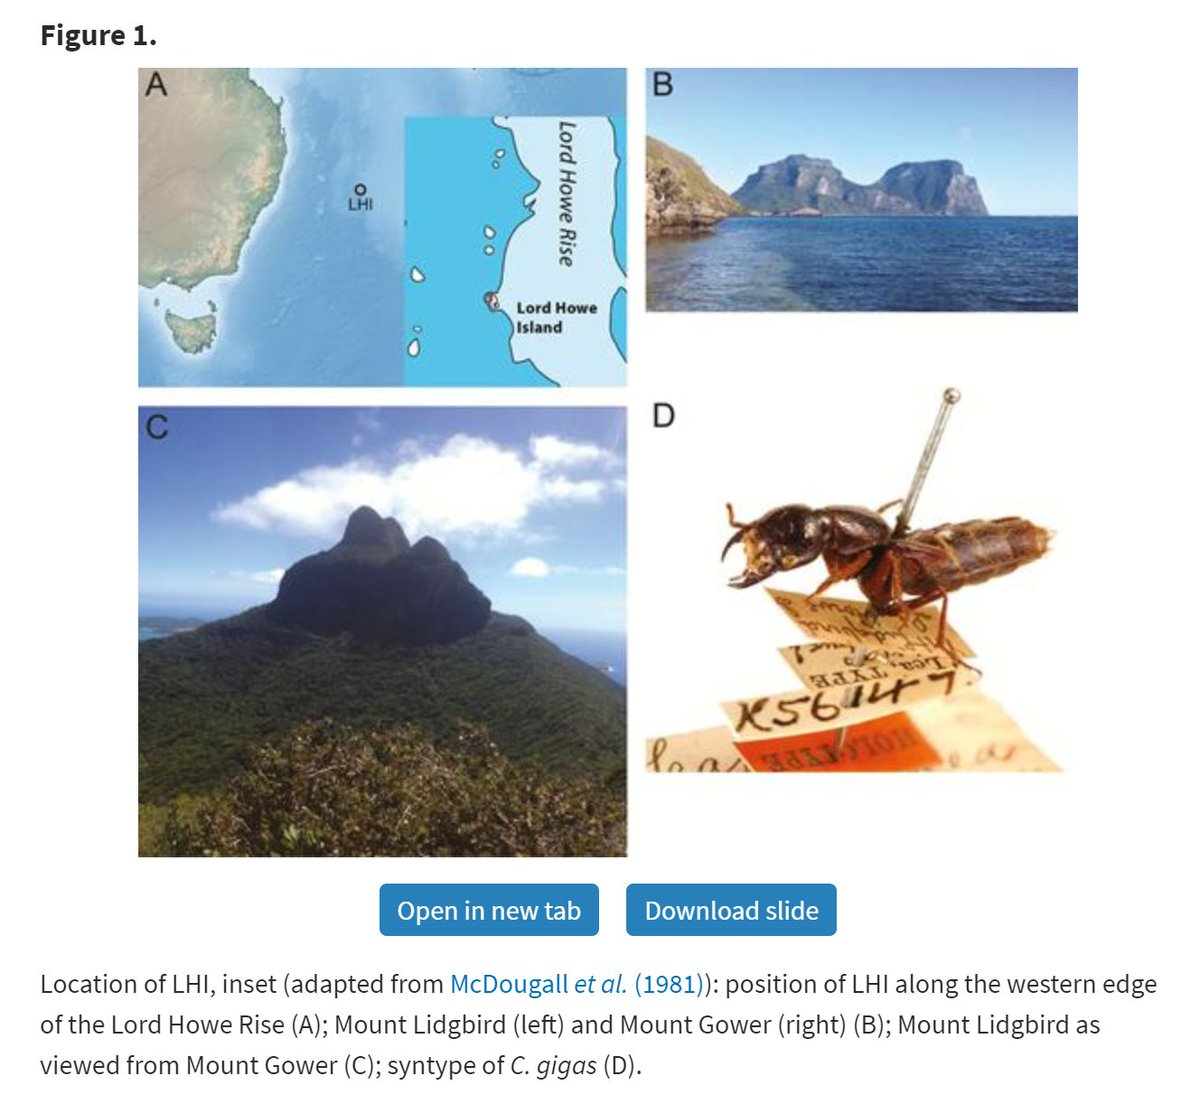 #LiteratureNotice Jensen et al. A total-evidence approach resolves phylogenetic placement of ‘Cafius’ gigas, a unique recently extinct rove beetle from Lord Howe Island doi.org/10.1093/zoolin… #Beetle #Beetles #RoveBeetles #Phylogeny #LordHoweIsland